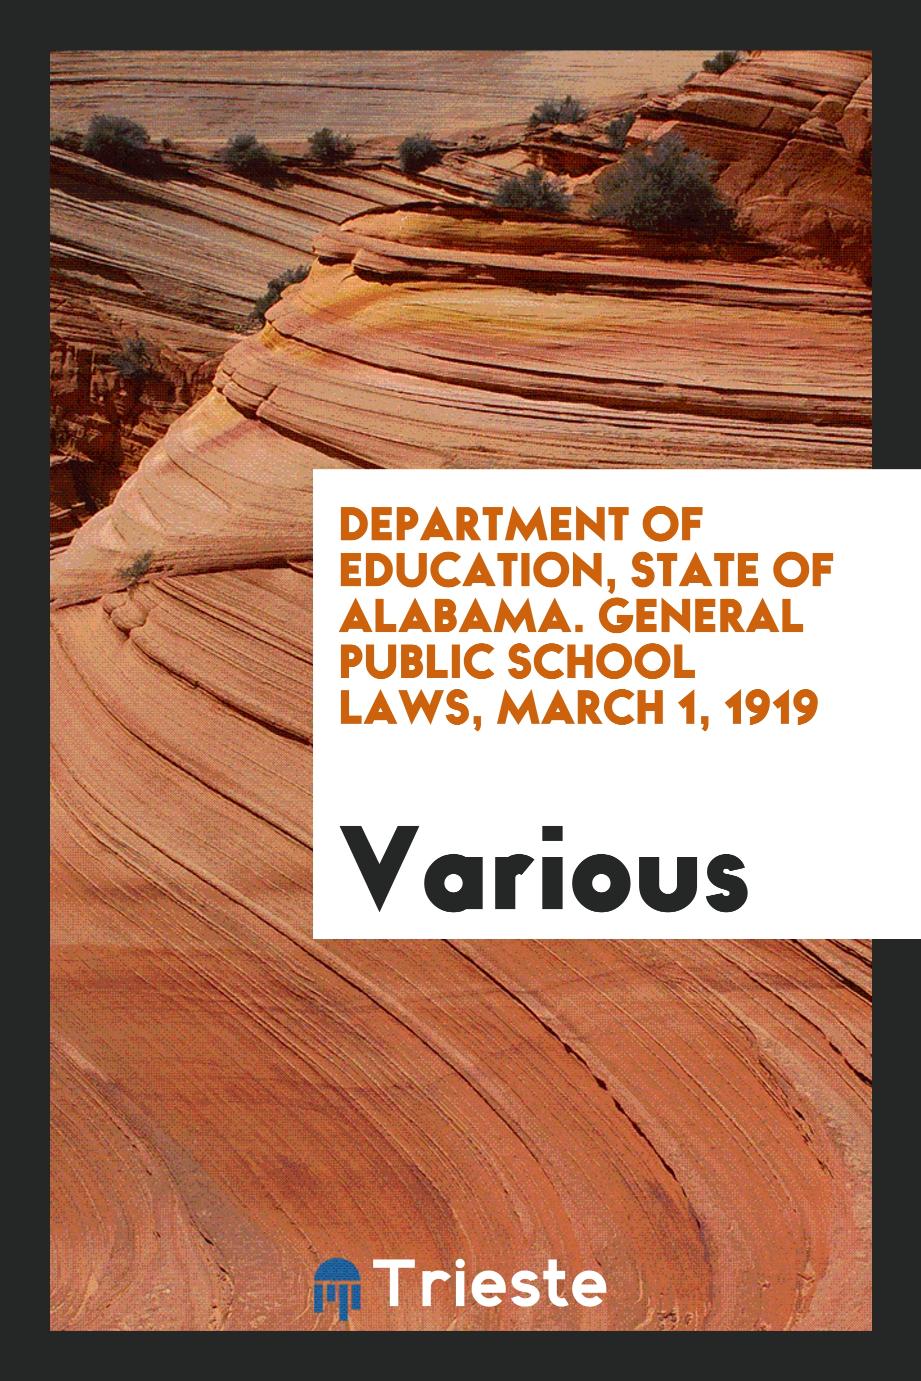 Department of Education, state of Alabama. General public school laws, March 1, 1919